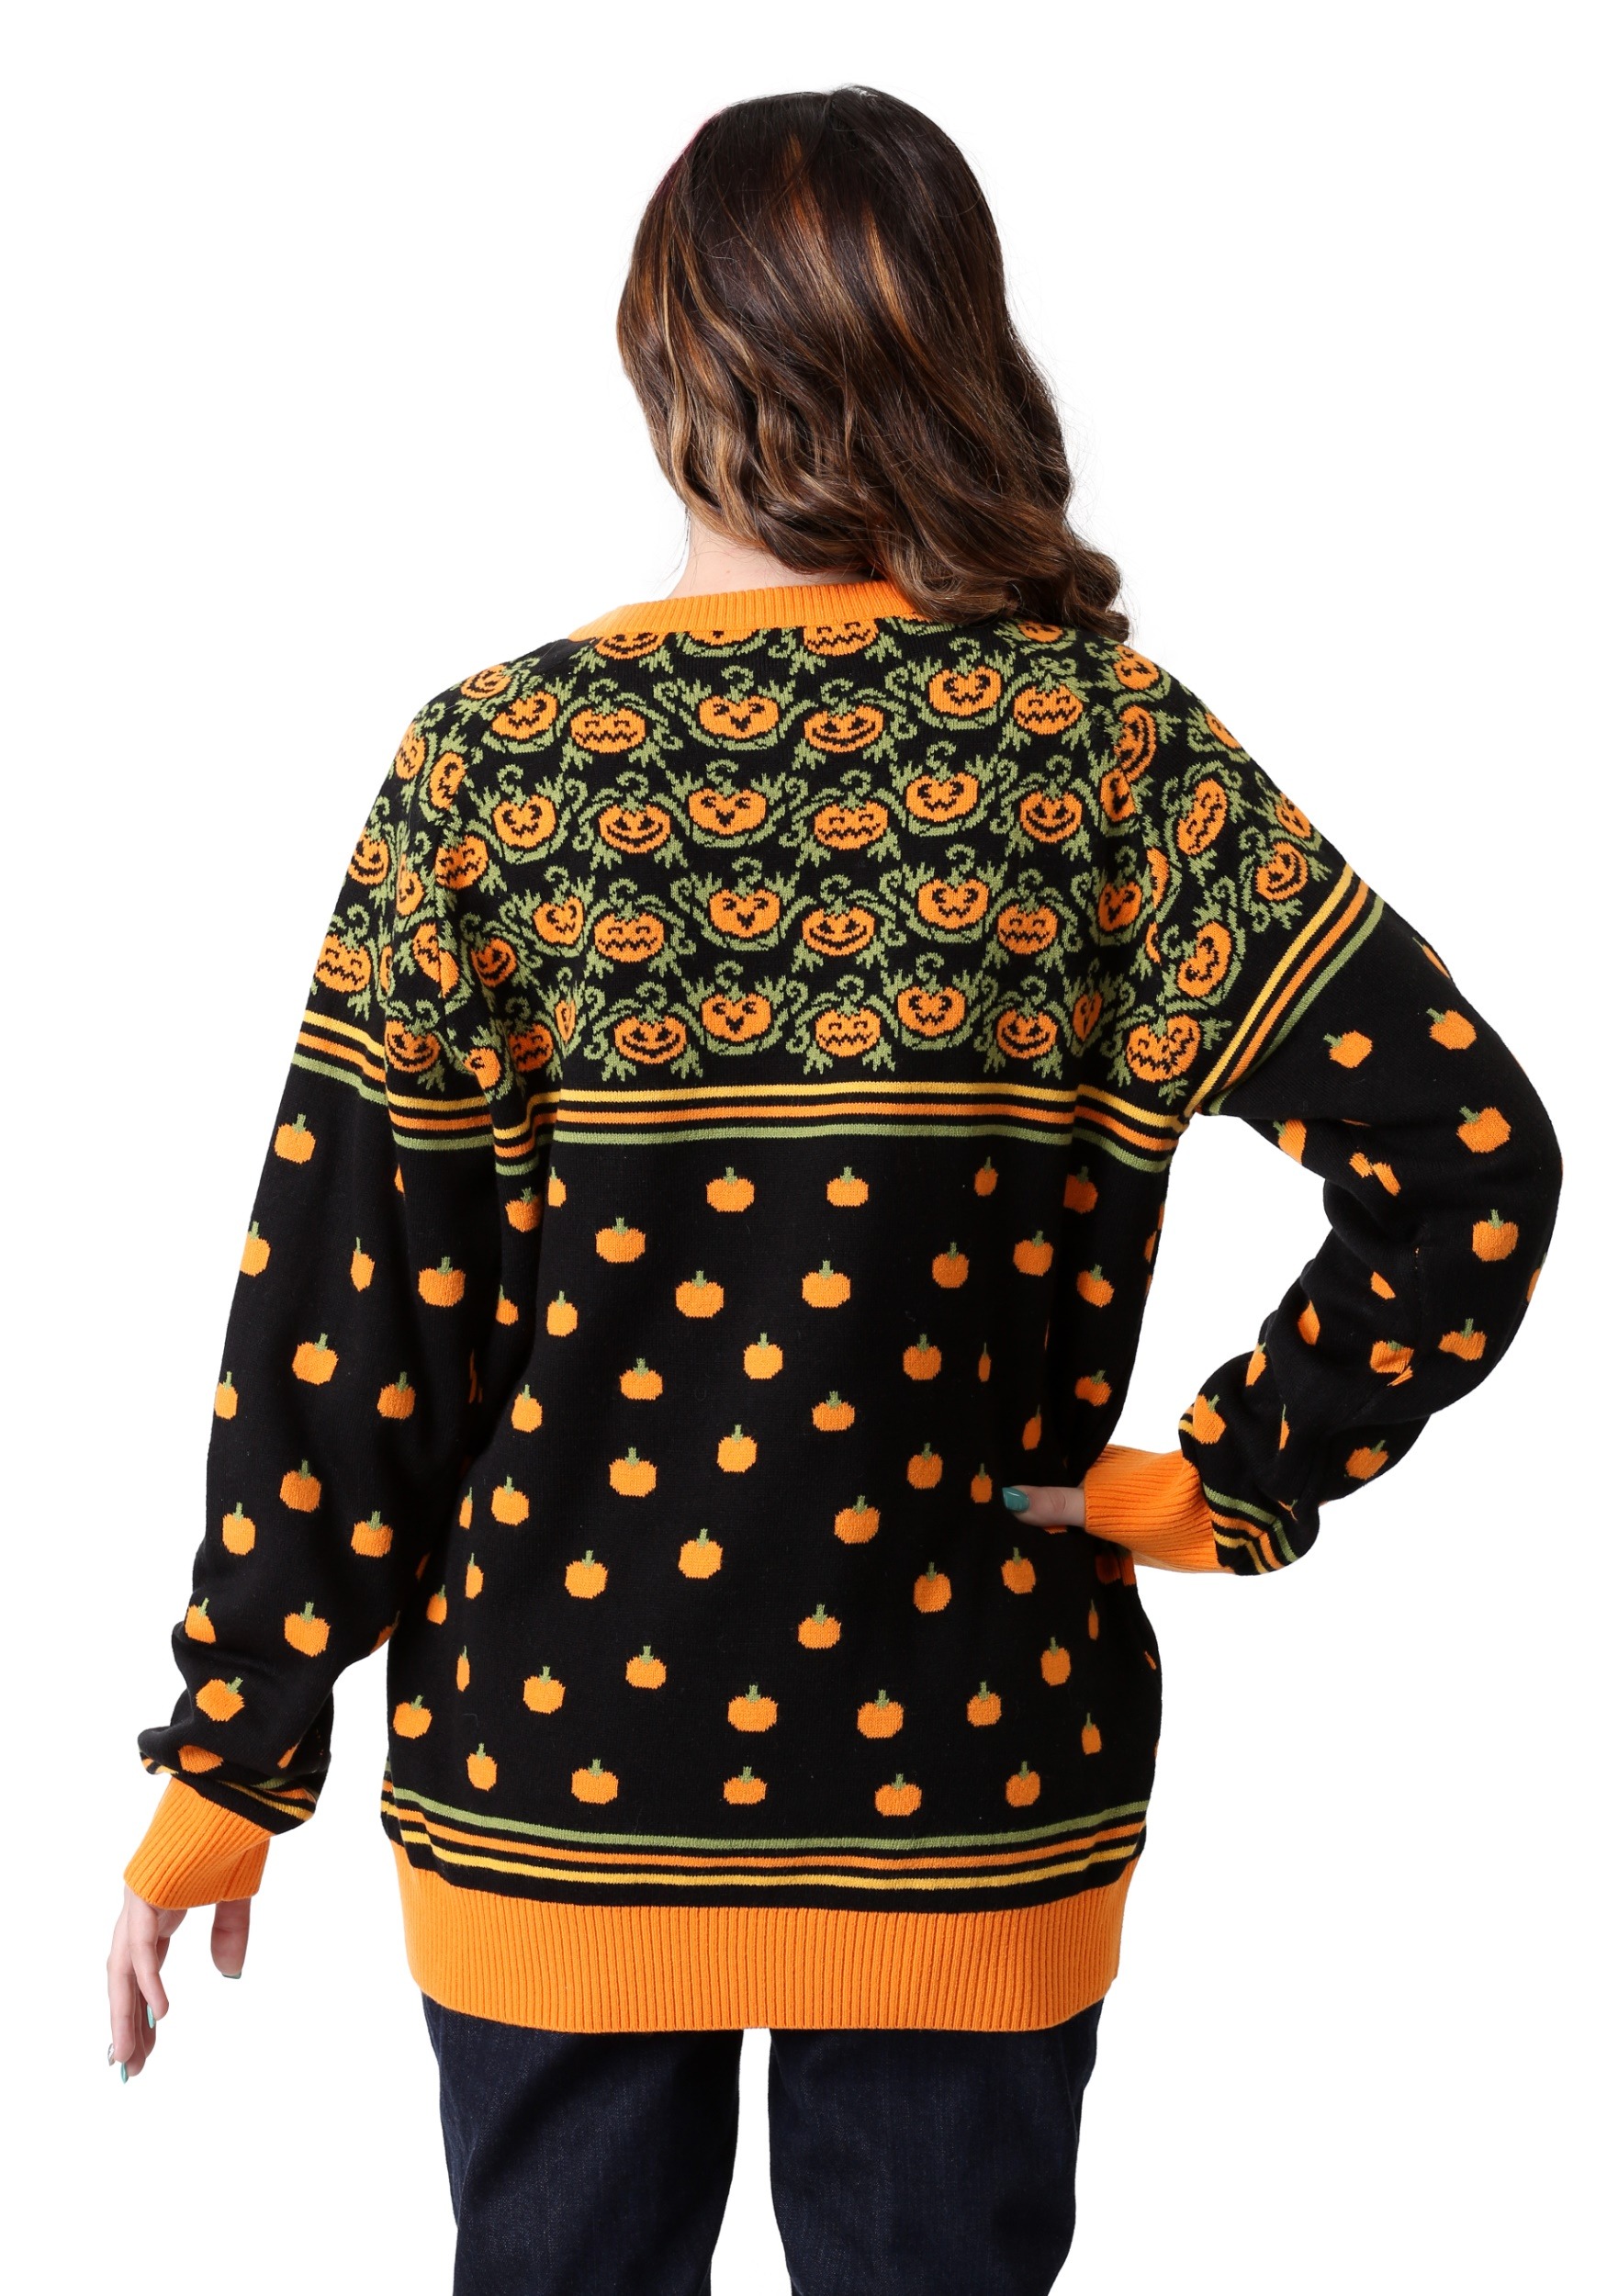 Pumpkin Patch Halloween Sweater For Adults Exclusive